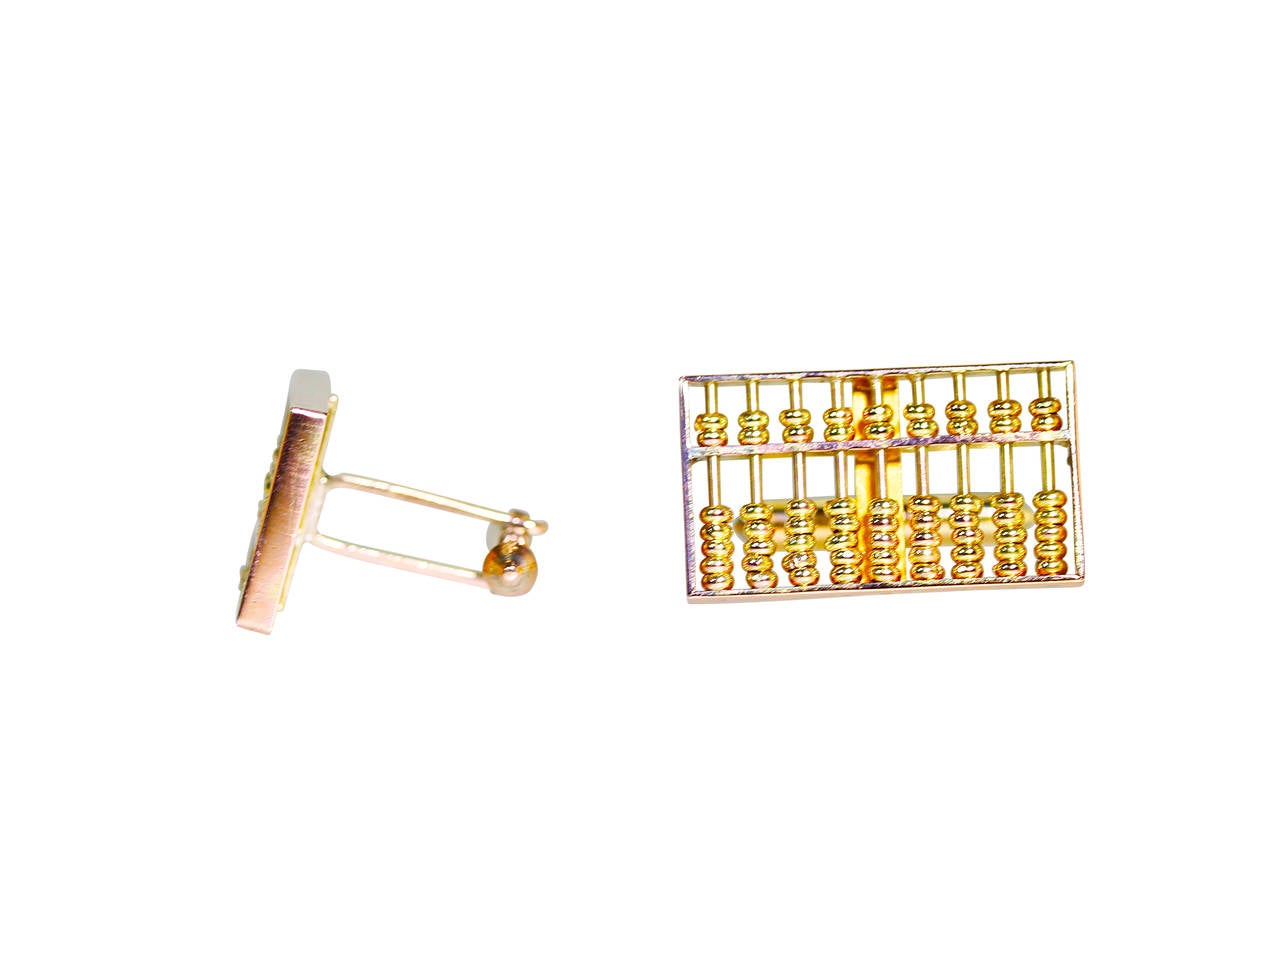 Pair of 14 karat yellow gold abacus cufflinks, designed as full working abacus, gross weight 11.0 grams, measuring 1 by 1/2 by 3/4 inch.